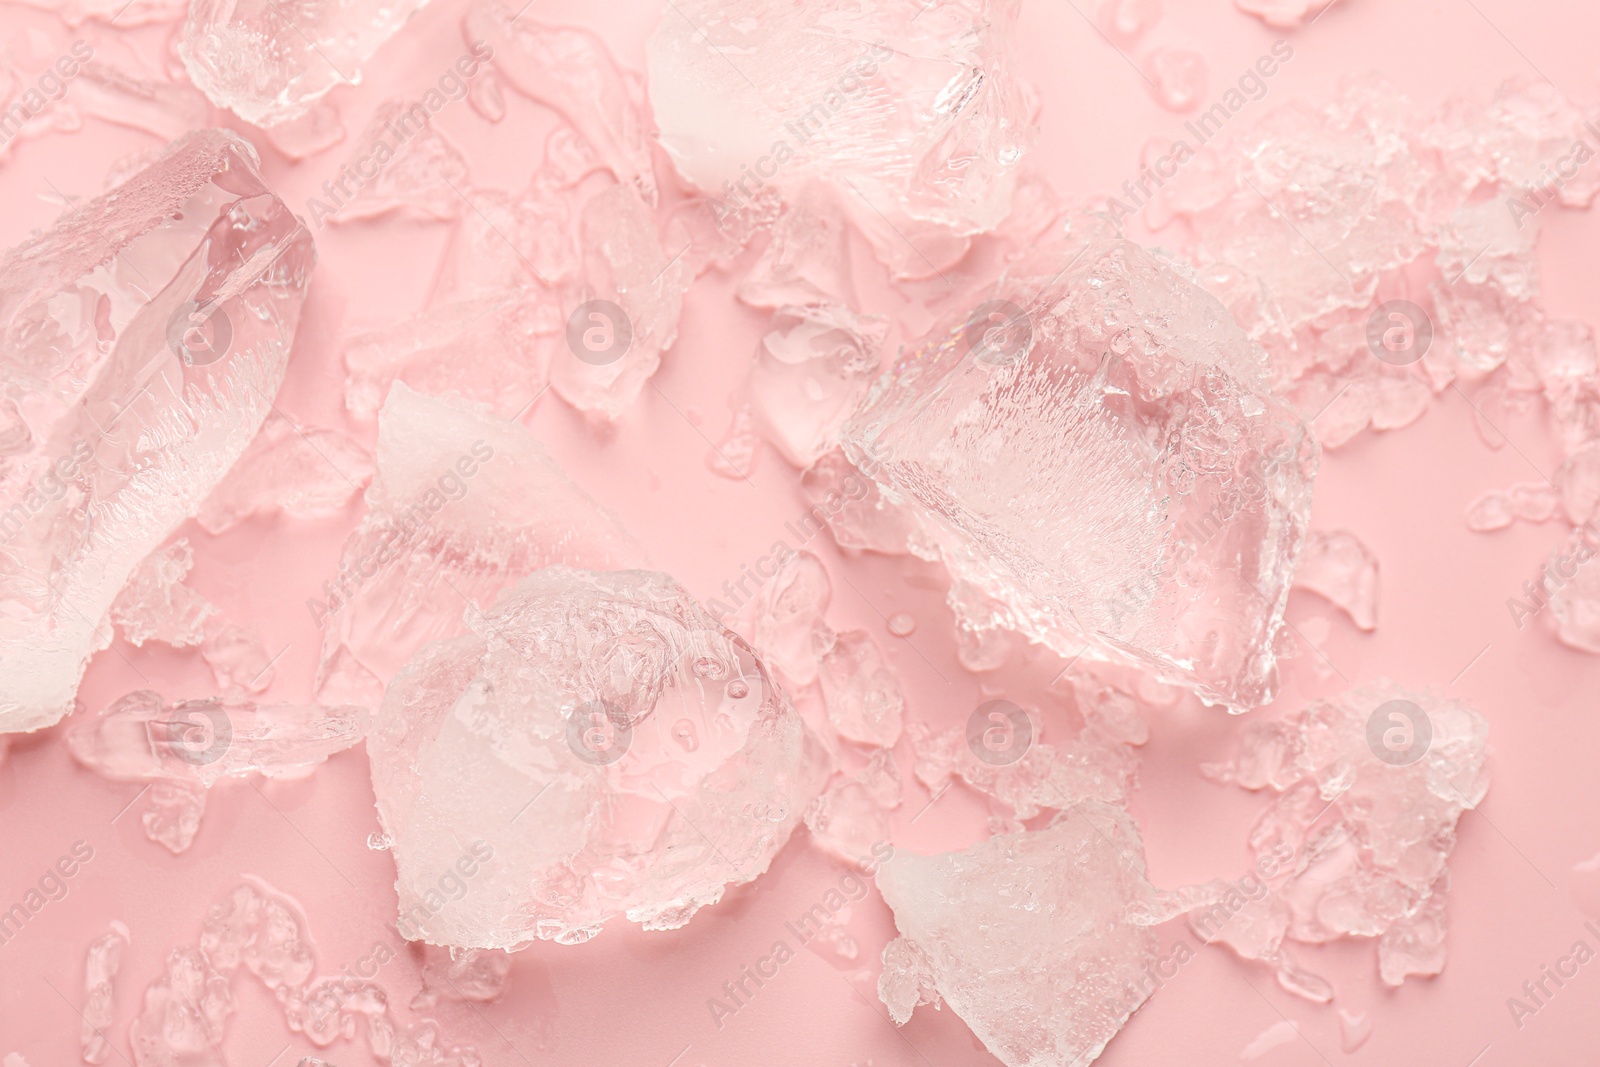 Photo of Pieces of crushed ice on pink background, top view